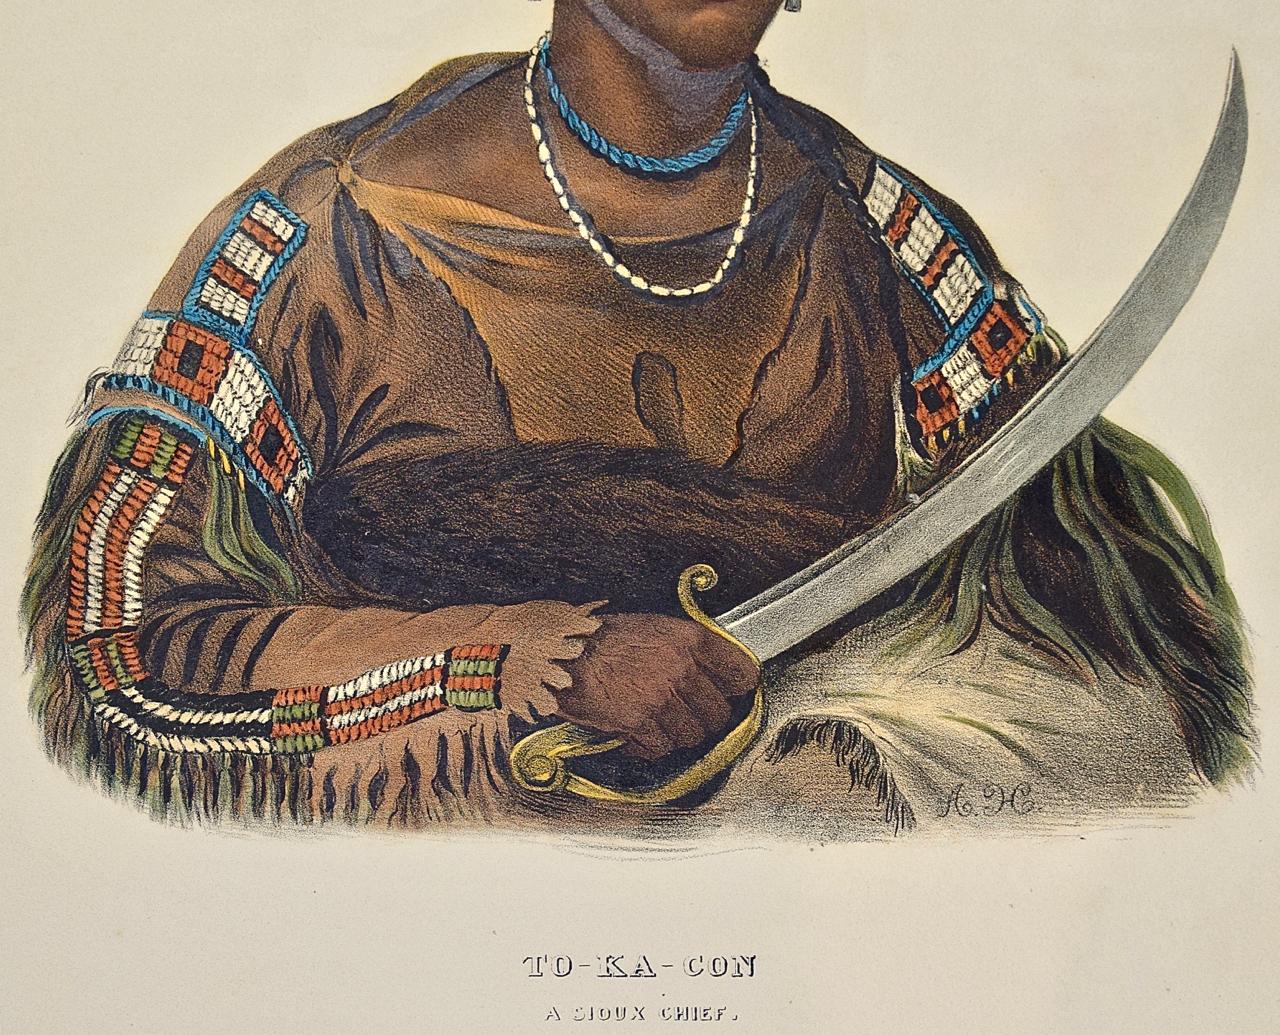 This is an original 19th century hand-colored folio-size McKenney and Hall engraving of a Native American entitled 